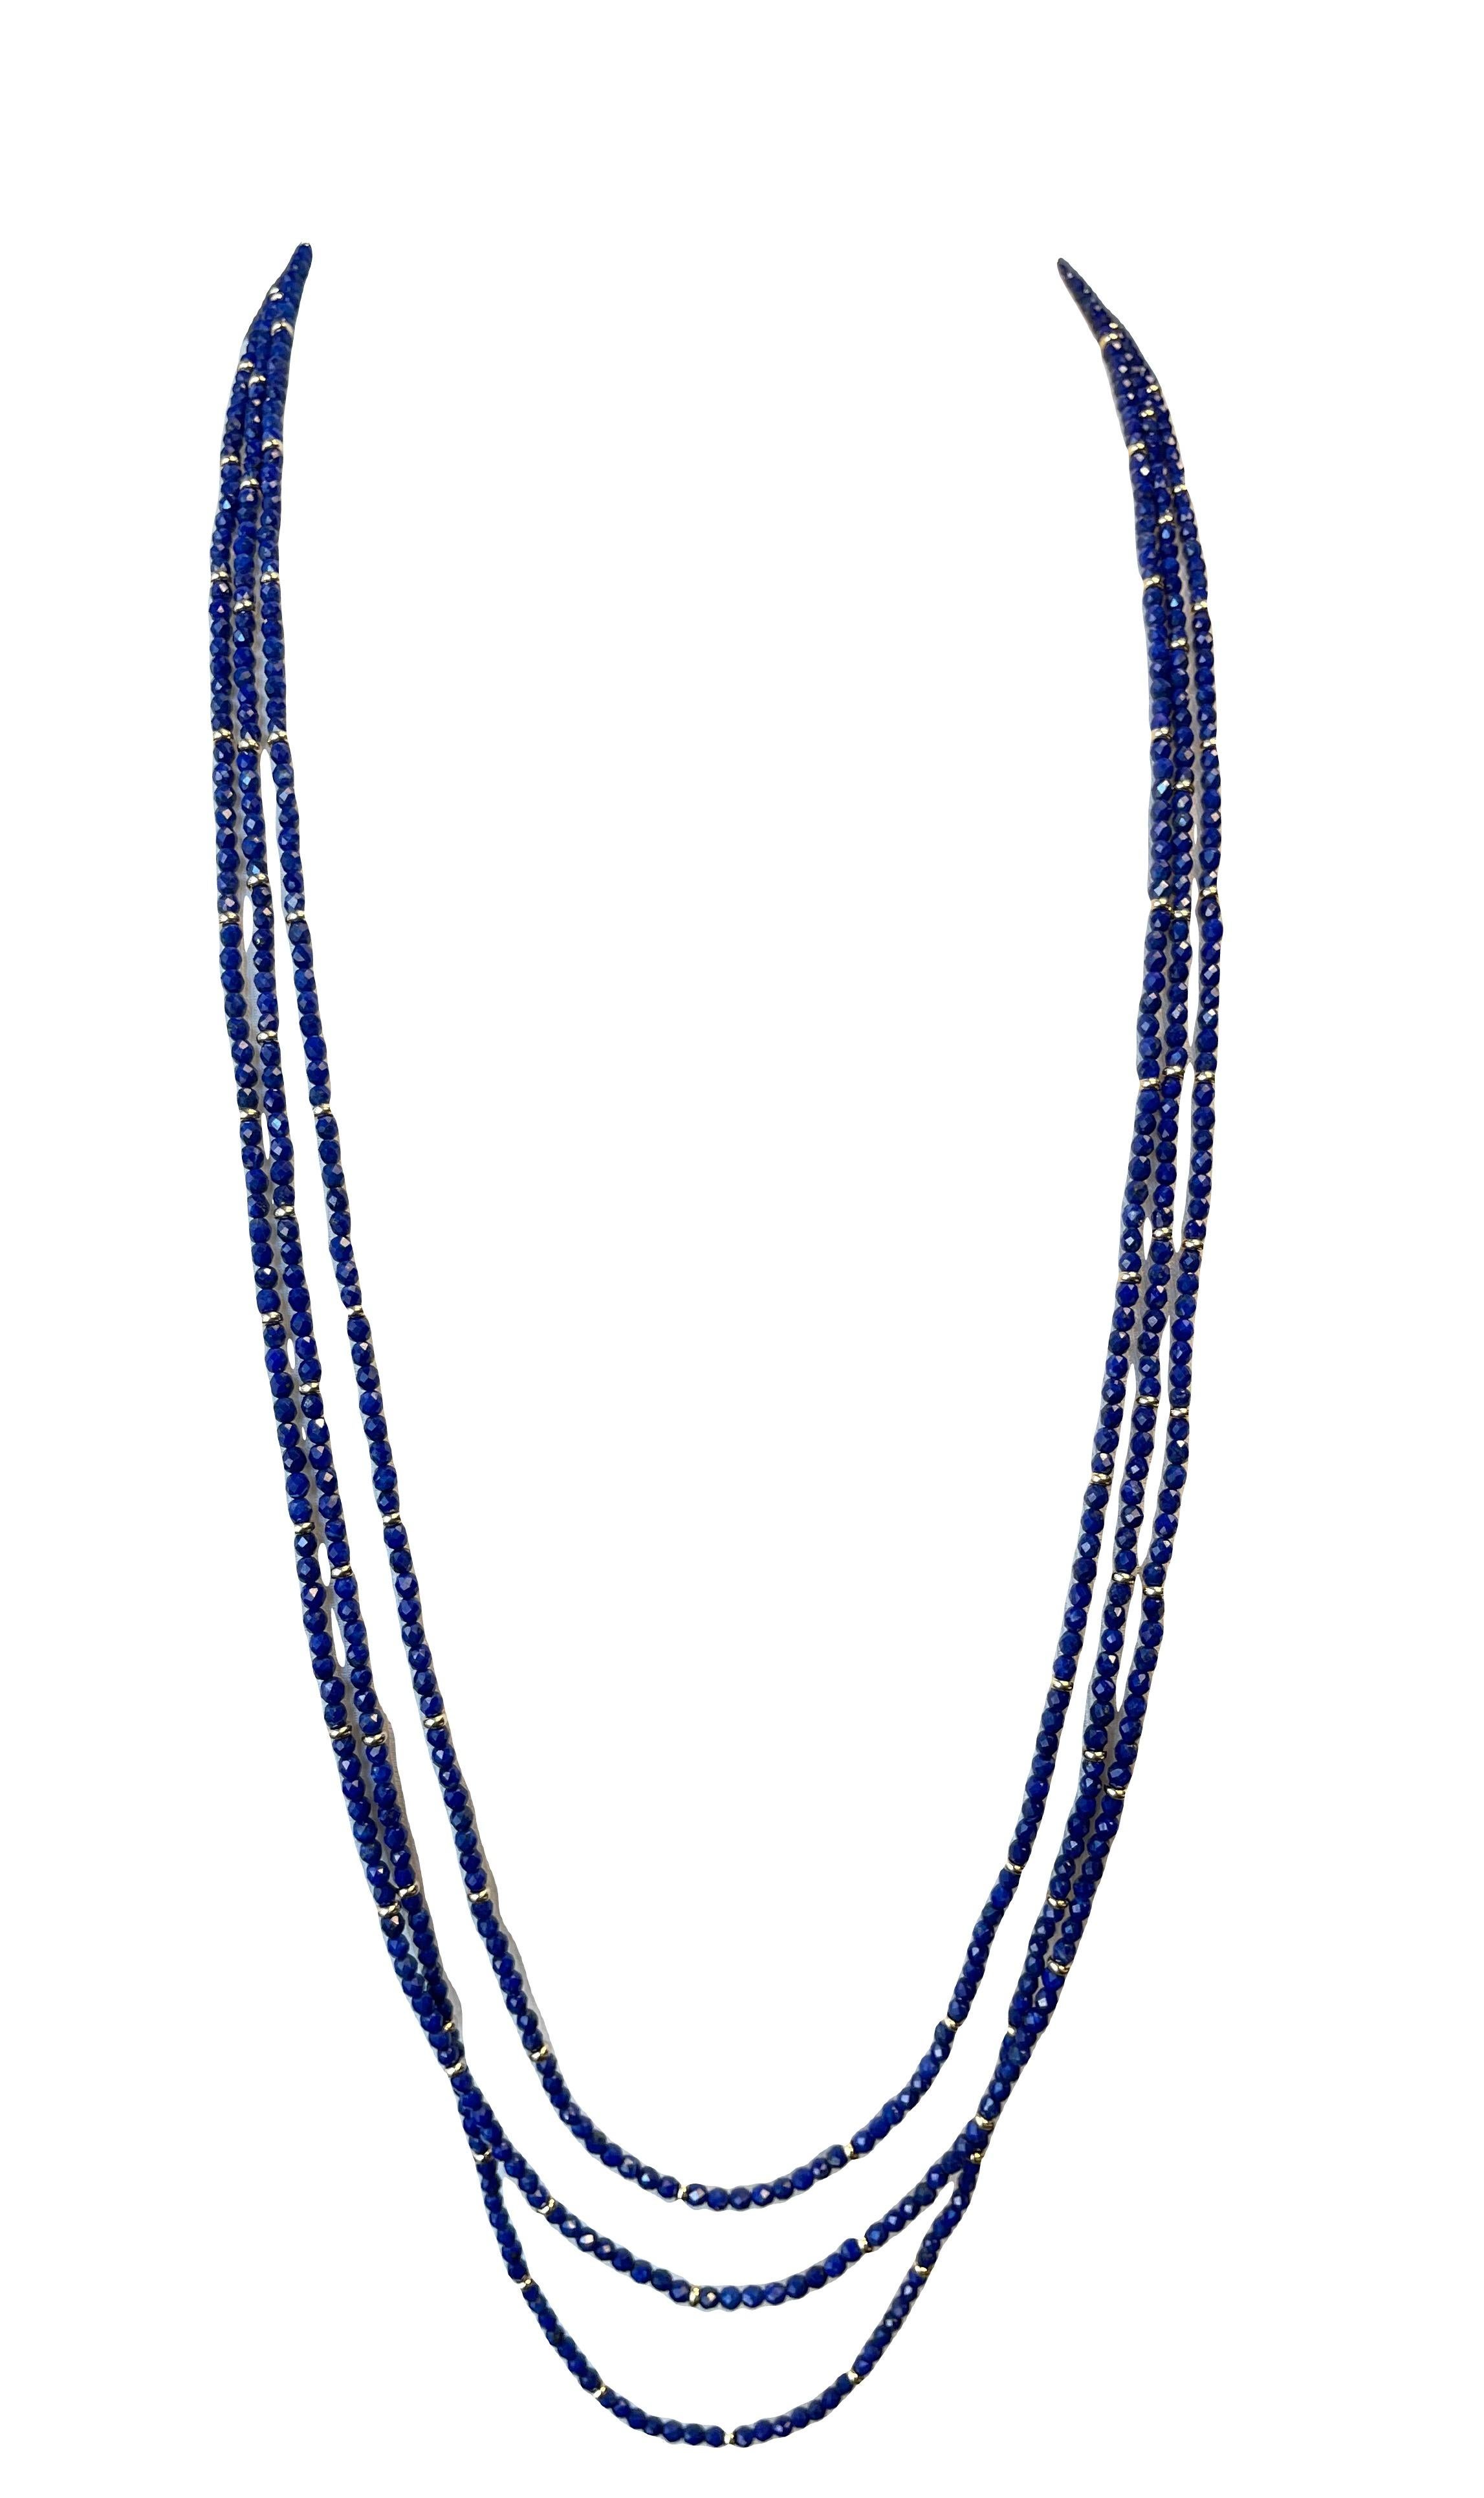 Women's or Men's Faceted Lapis Bead Necklace with Yellow Gold Accents, 34 Inches